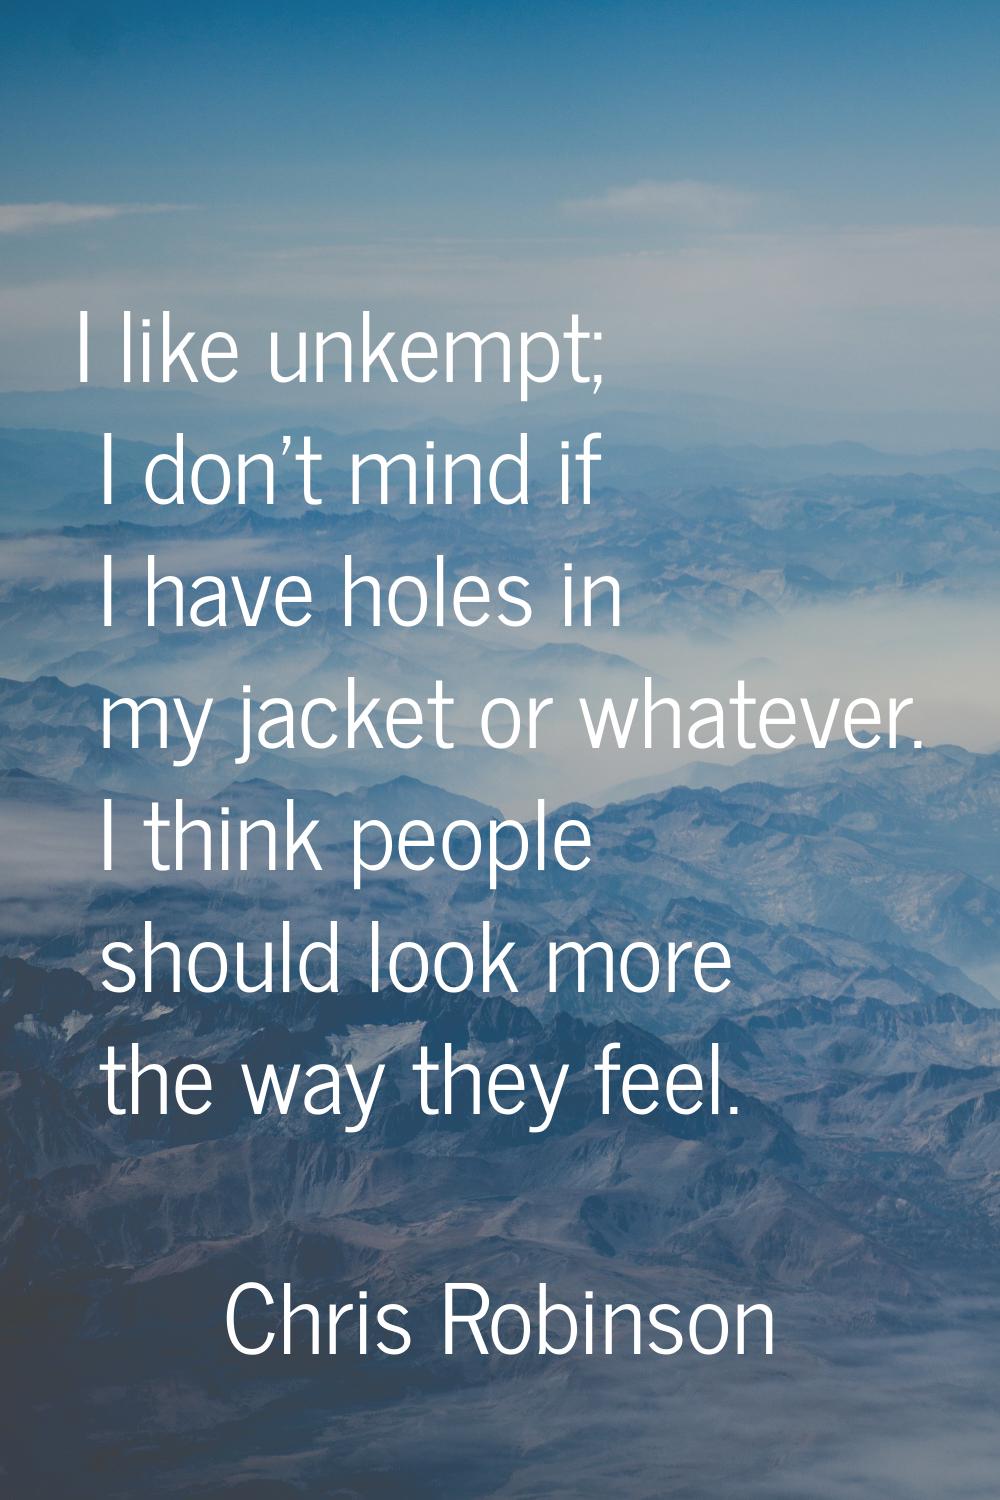 I like unkempt; I don't mind if I have holes in my jacket or whatever. I think people should look m